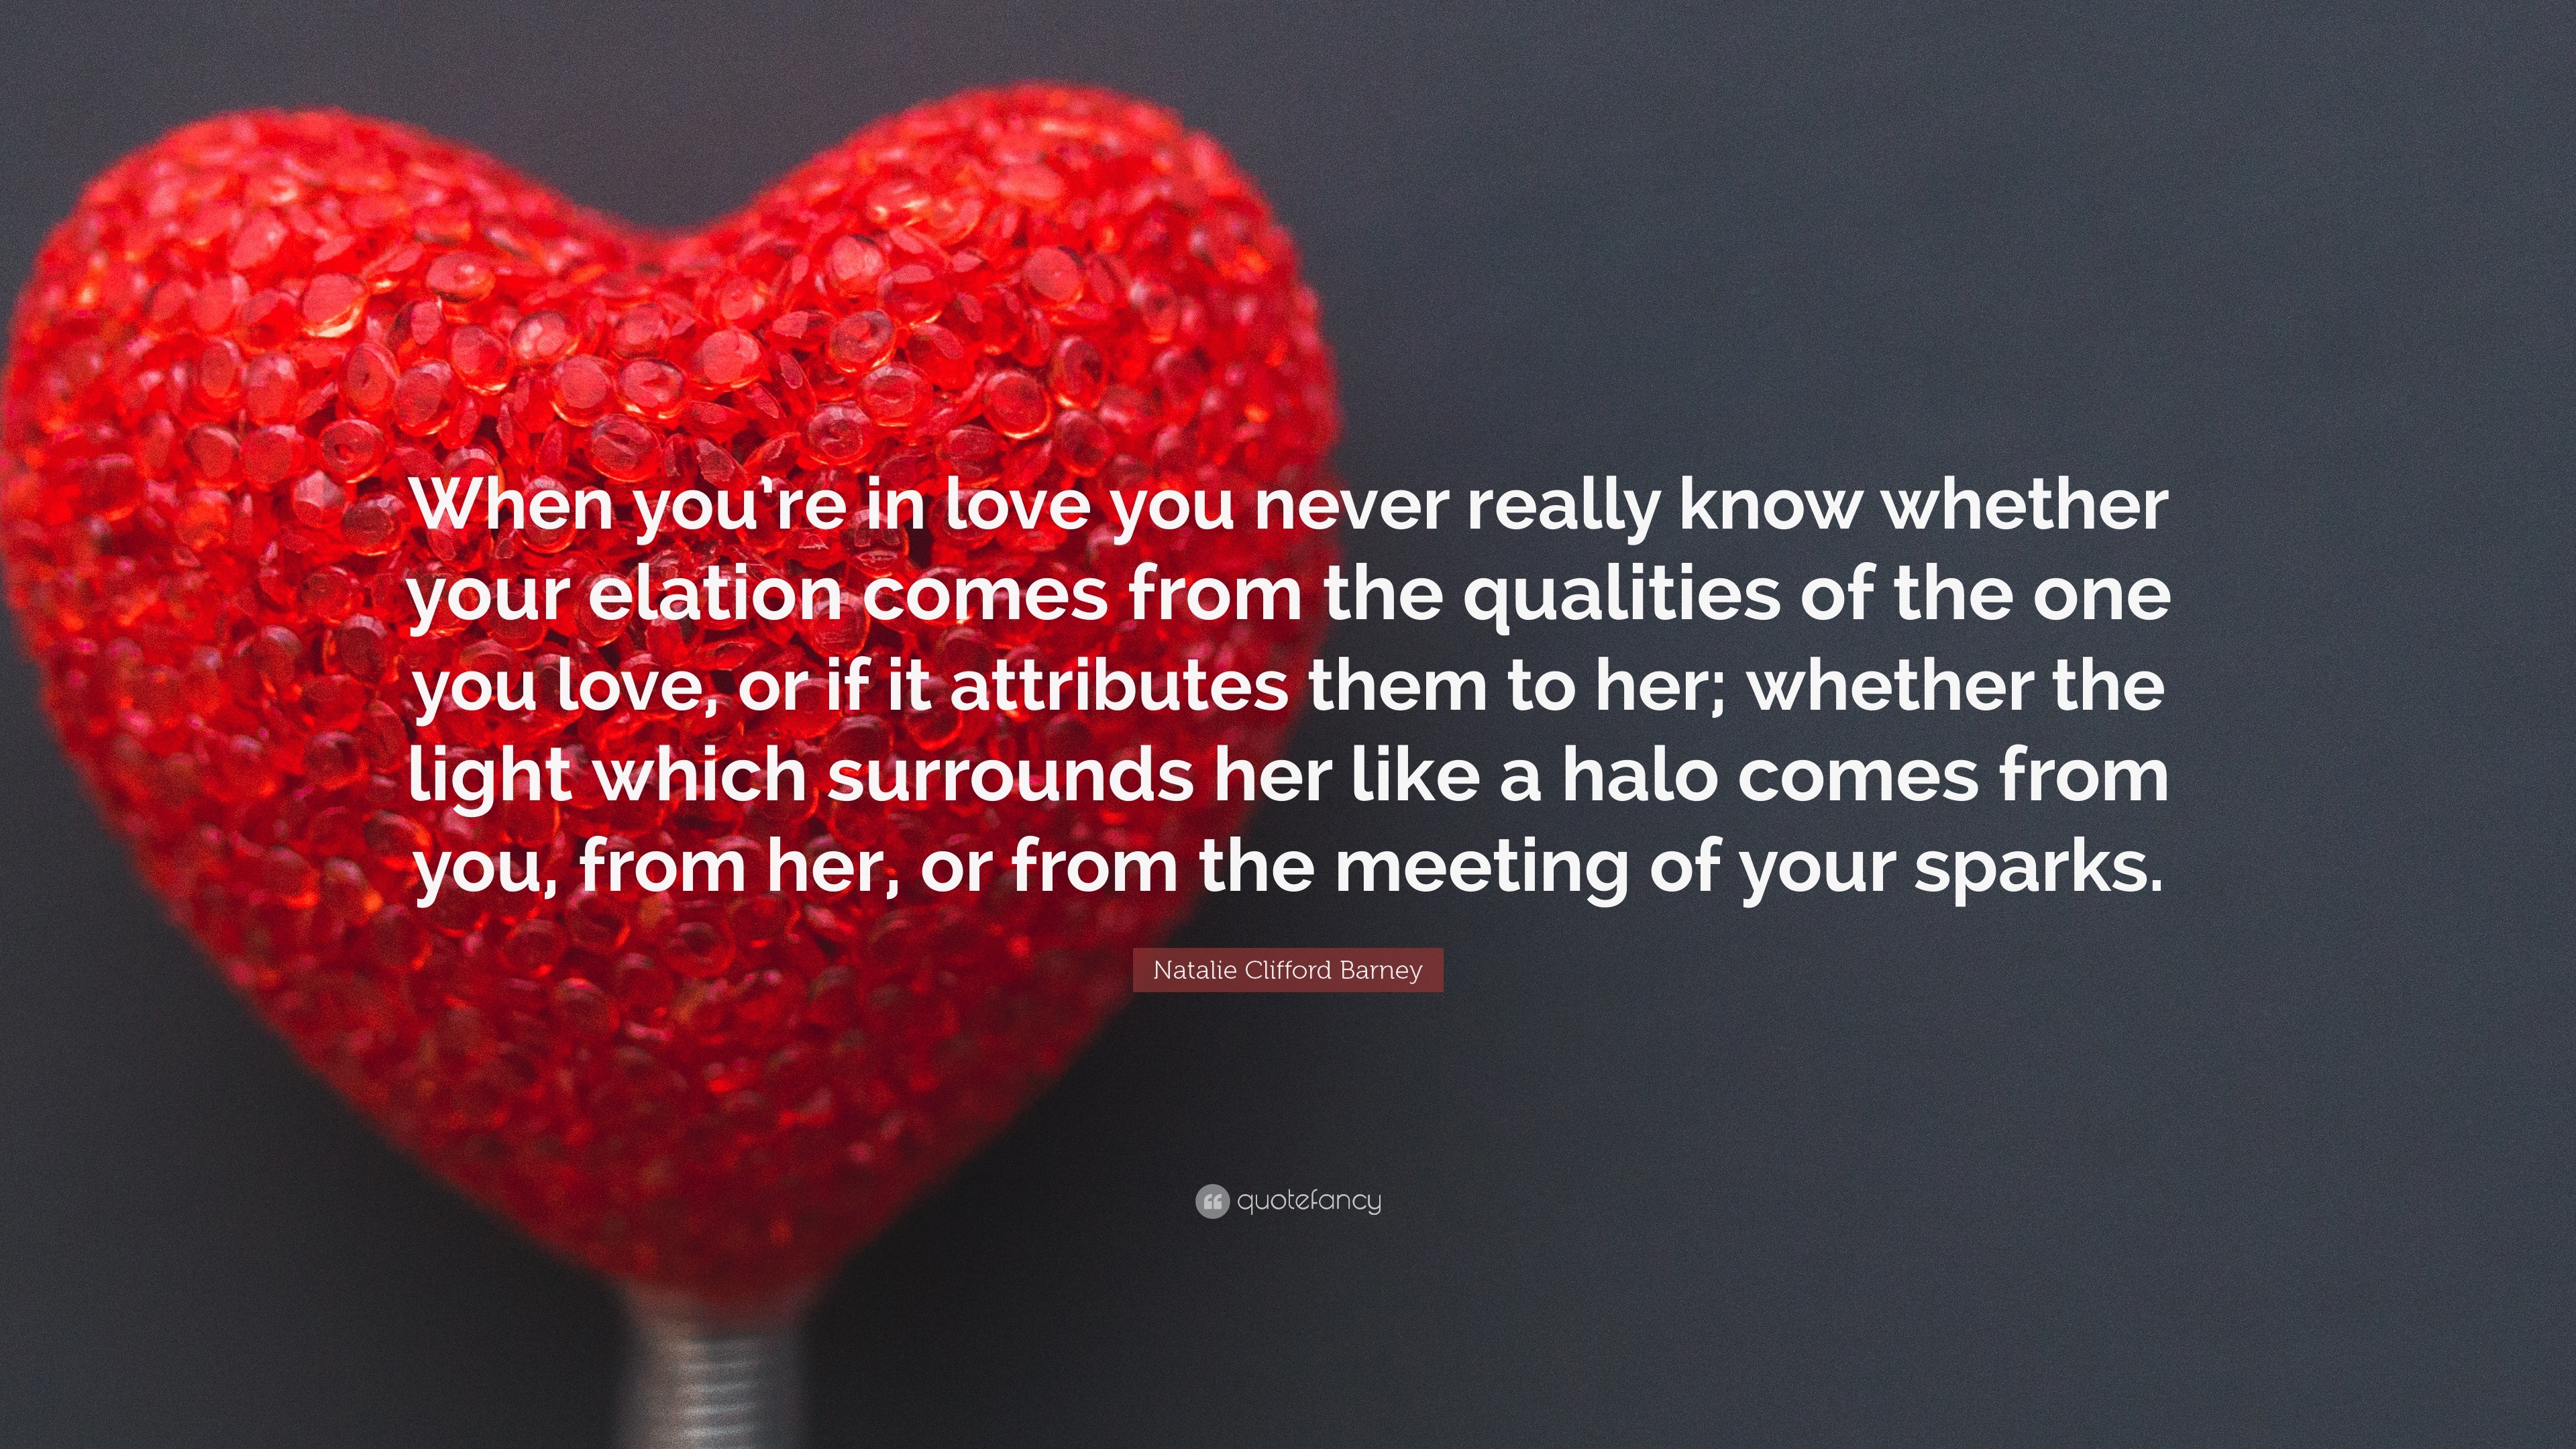 Get Your Partner's Heart Racing with These Racy Valentine's Day Quotes